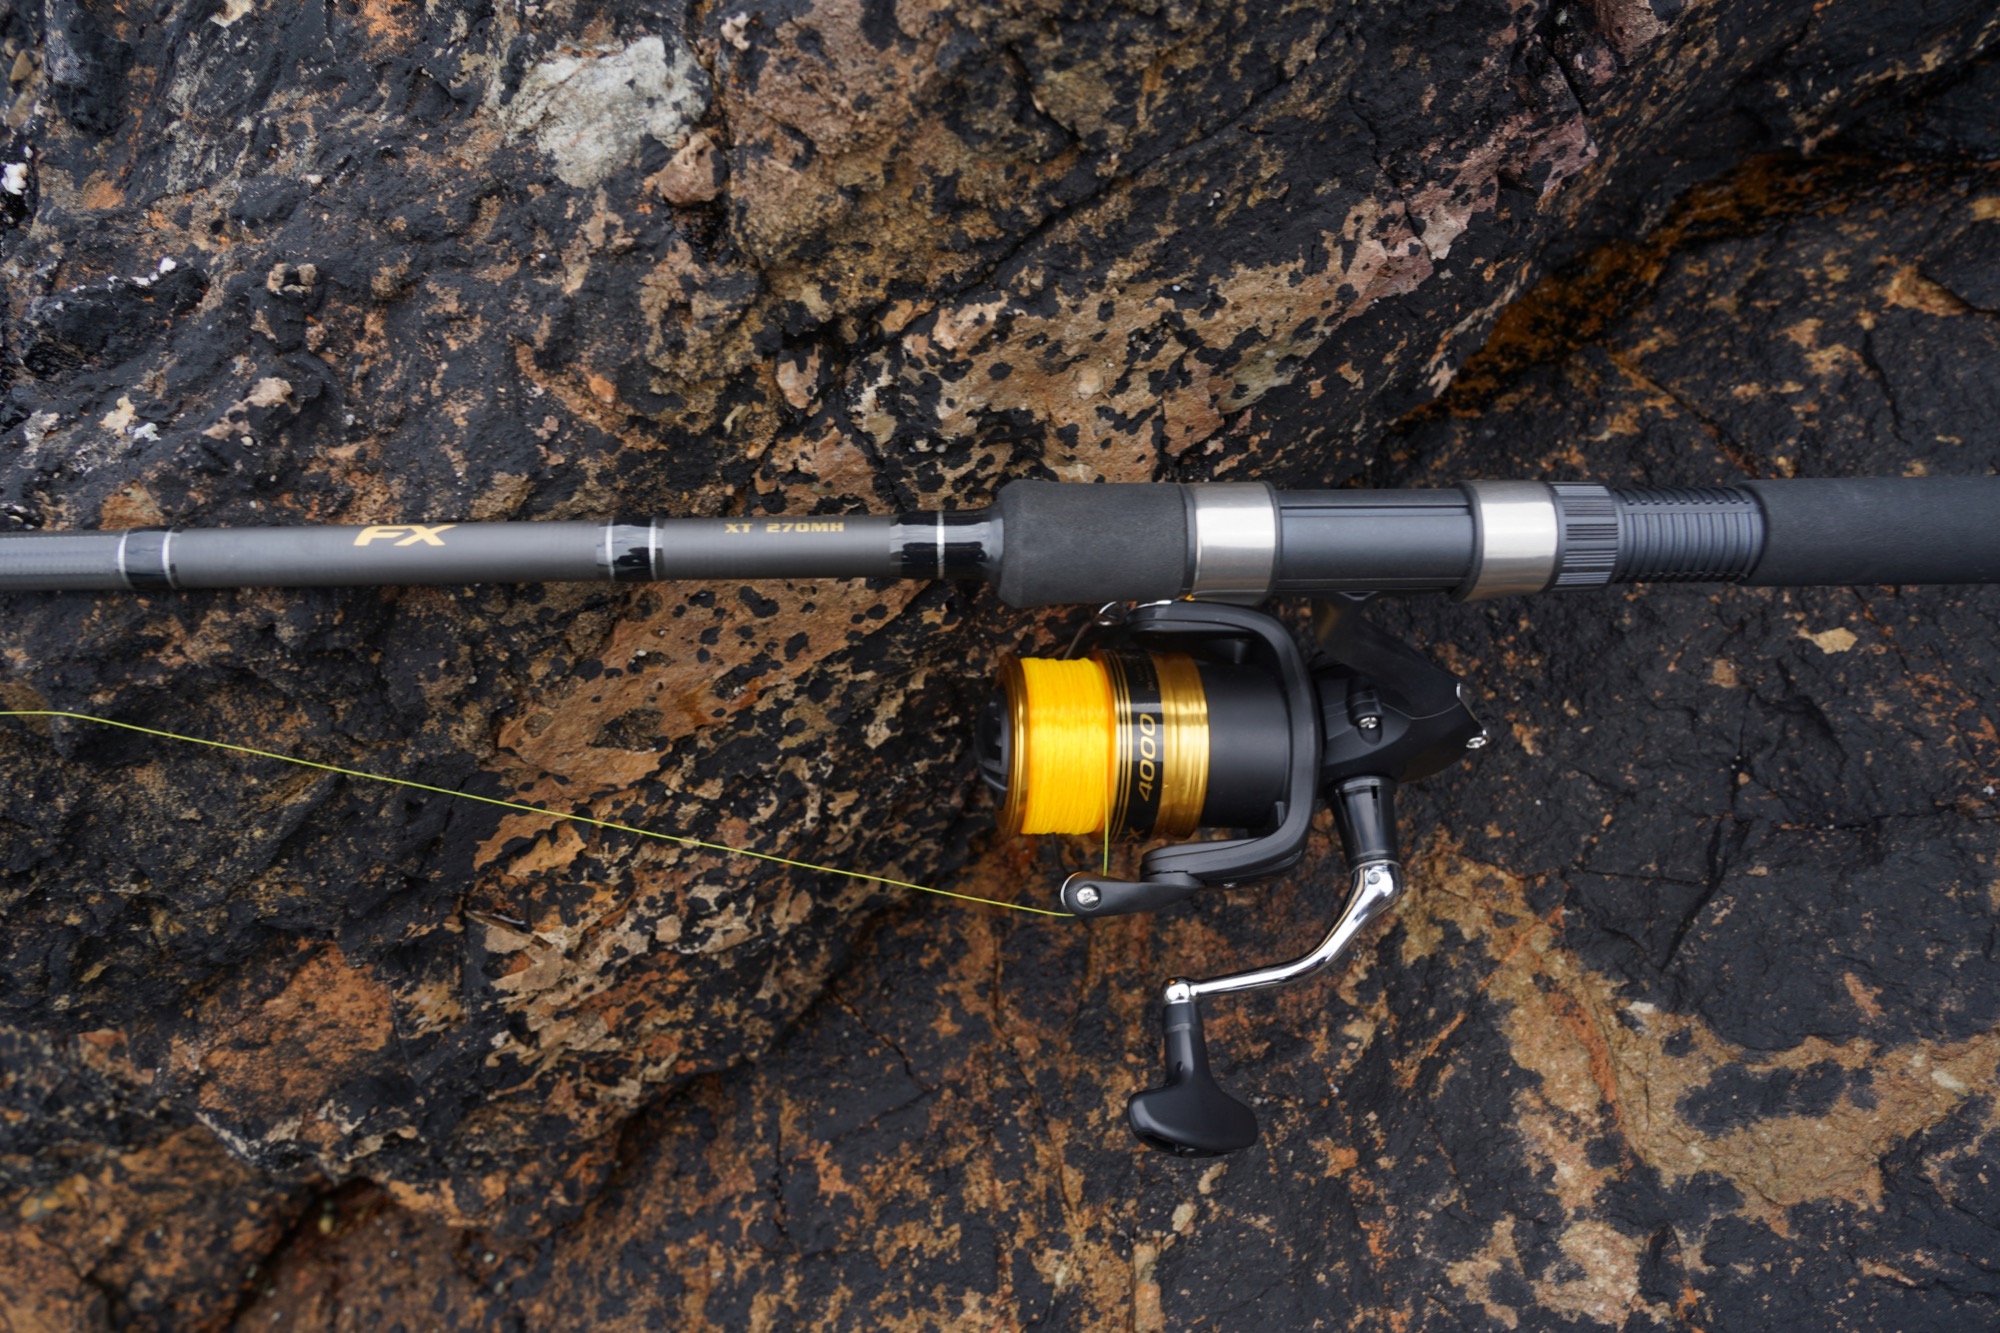 Shimano FX Spooled Rod and Reel Fishing Combo - Addict Tackle